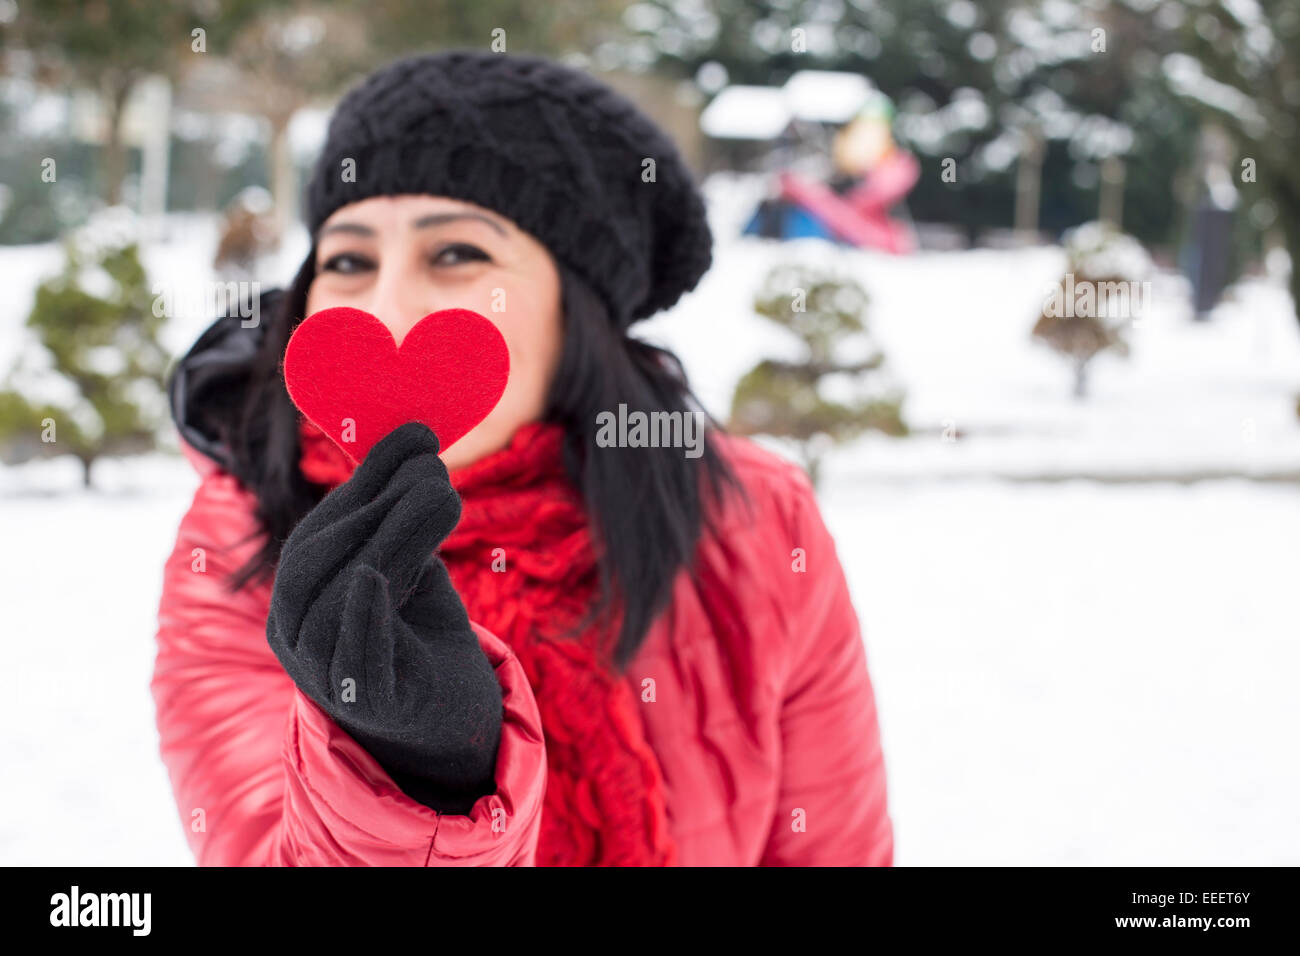 Black haired Turkish women holding a red heart with black warm wool gloves and celebrating Valentine's day with snowy background Stock Photo